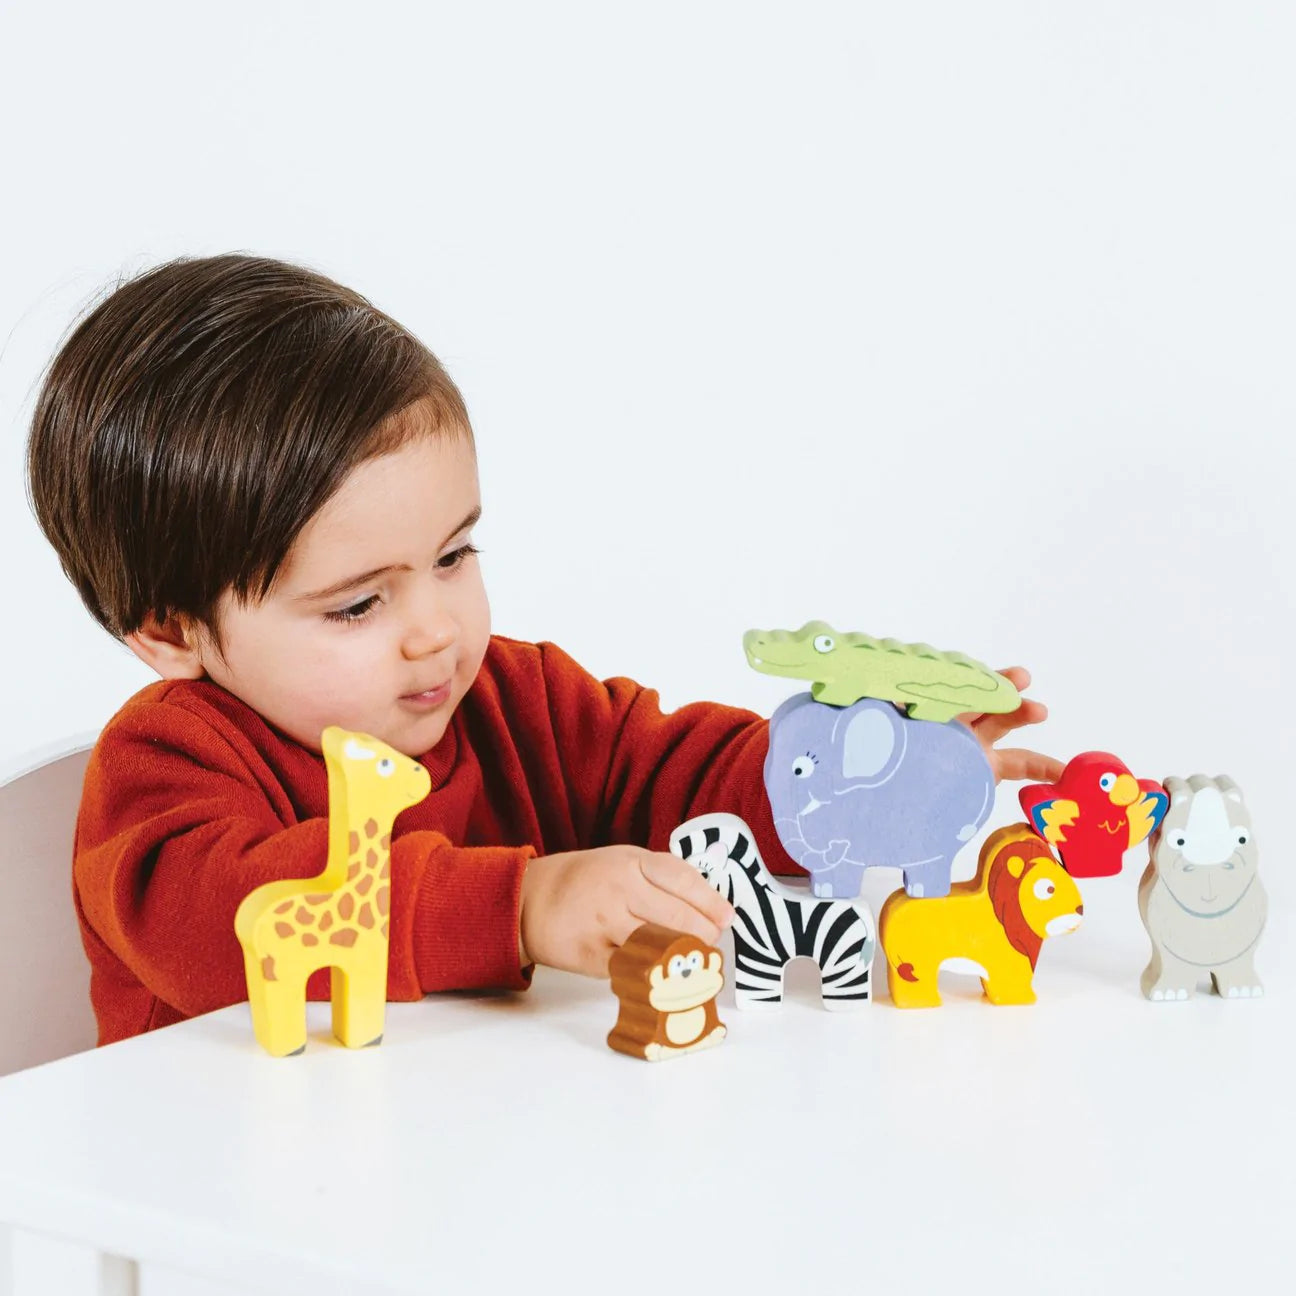 Children's Toys Suitable for 1 to 2 years